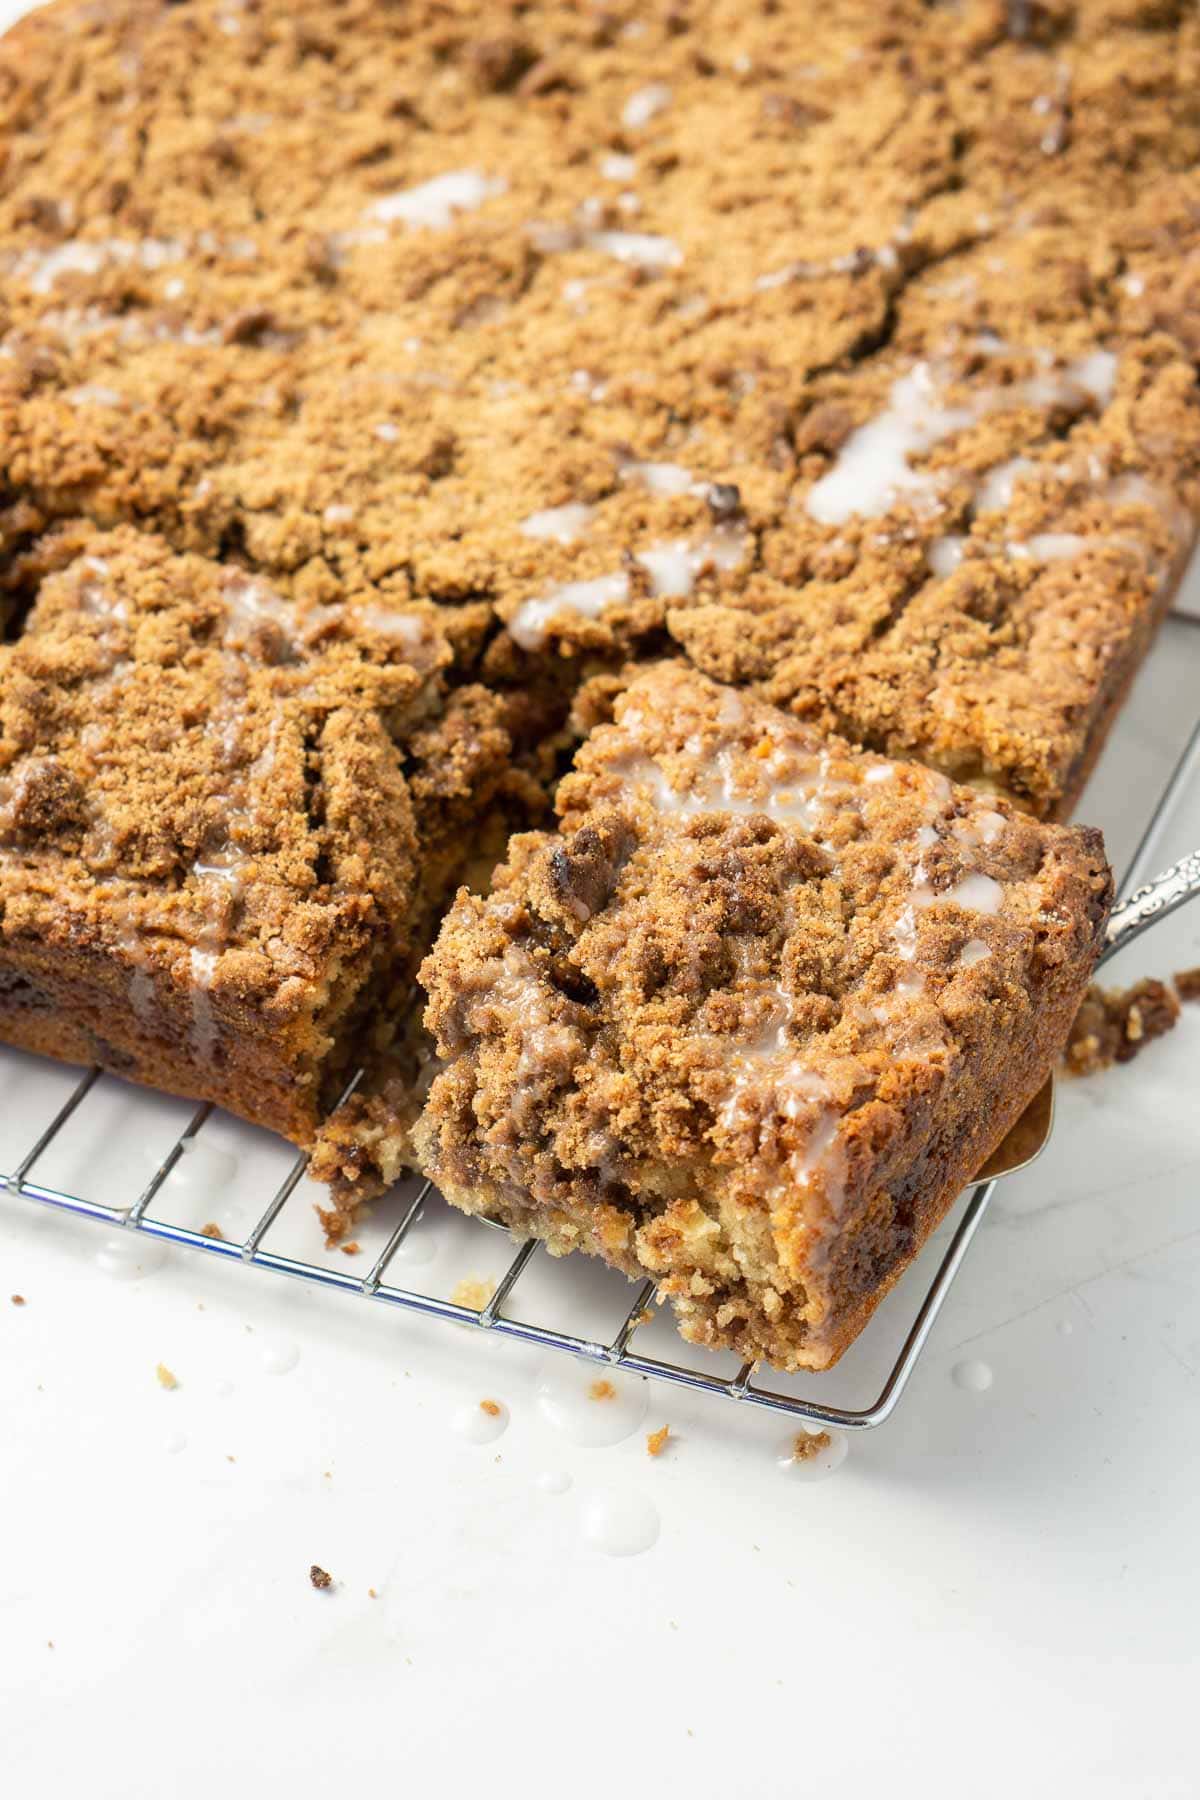 Coffee cake being cut into squares and served.